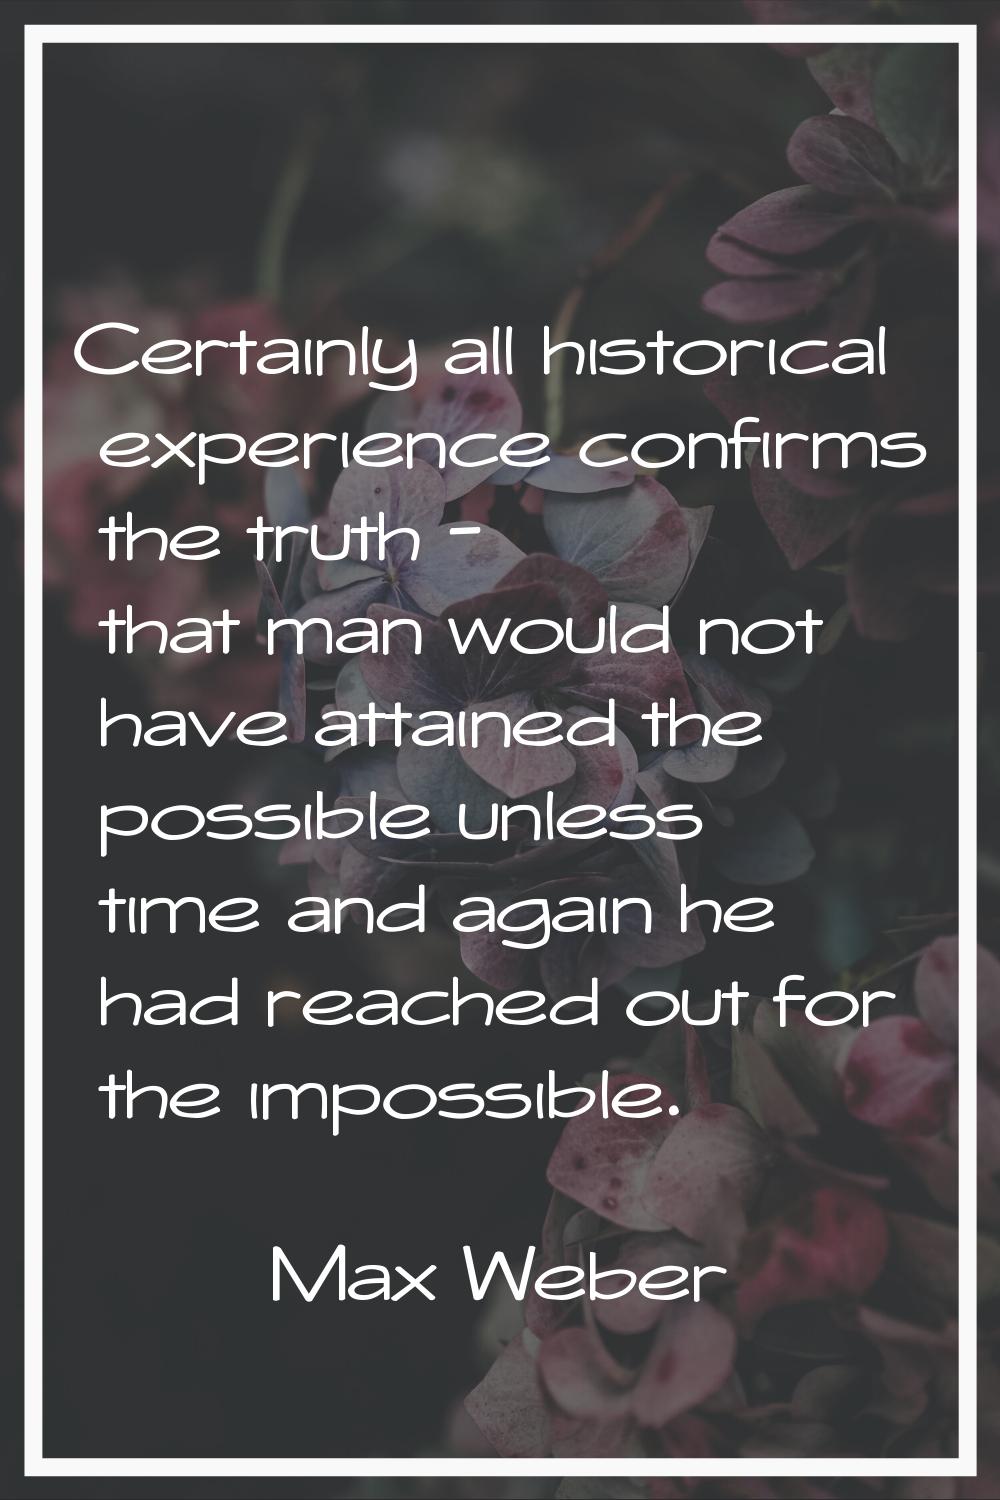 Certainly all historical experience confirms the truth - that man would not have attained the possi